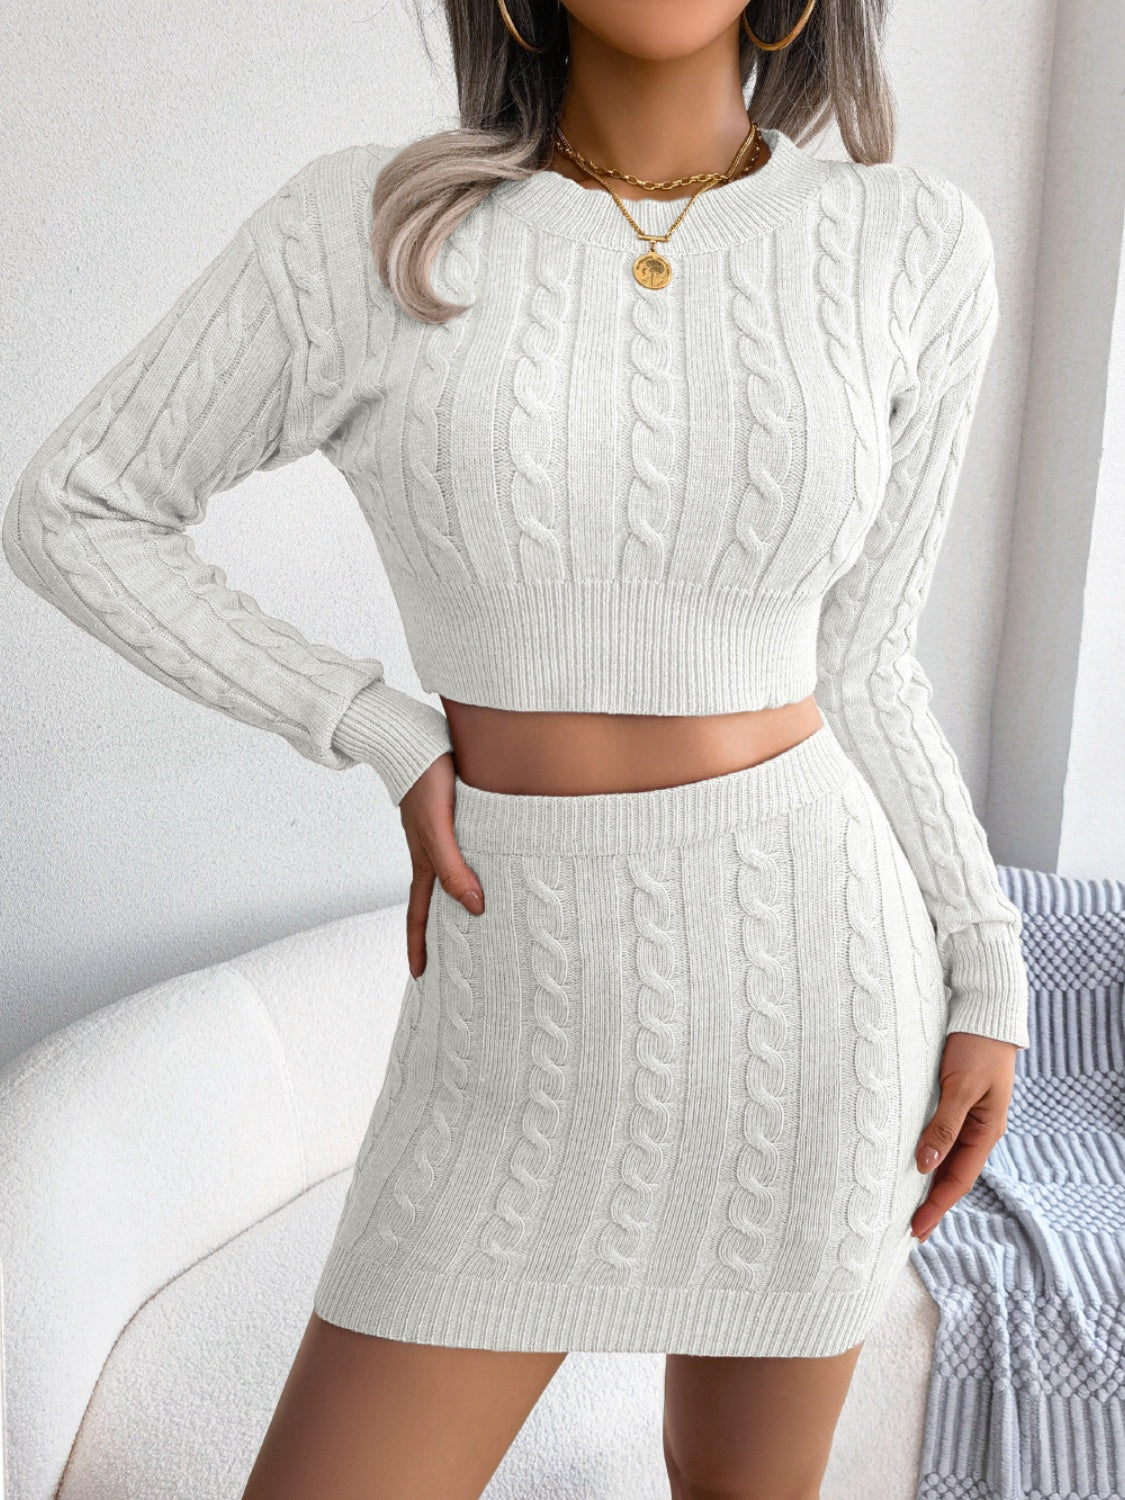 Cable-Knit Round Neck Top and Skirt Sweater Set White / S Apparel and Accessories